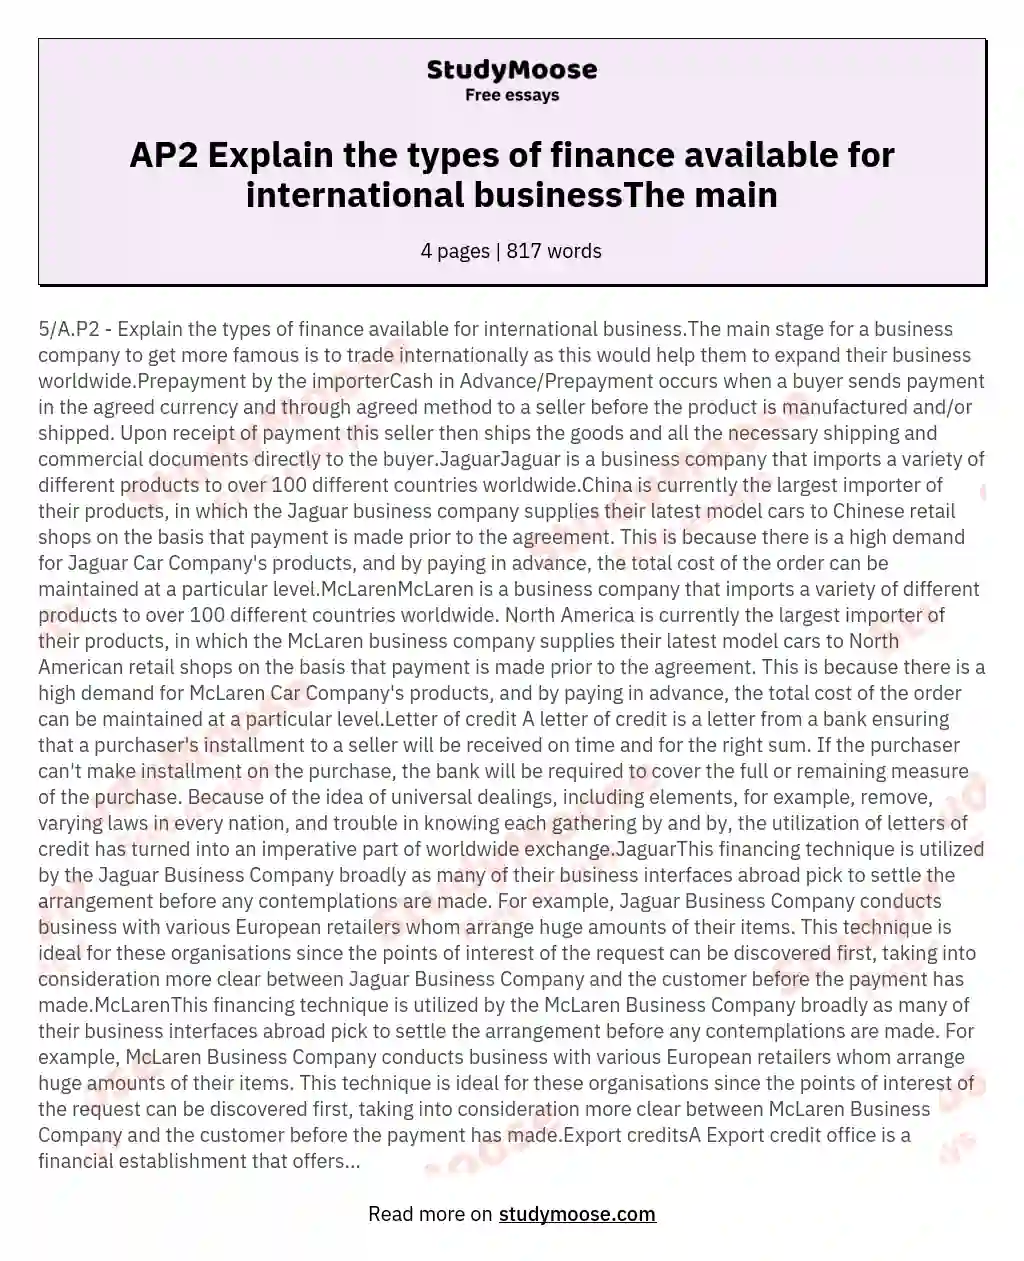 AP2 Explain the types of finance available for international businessThe main